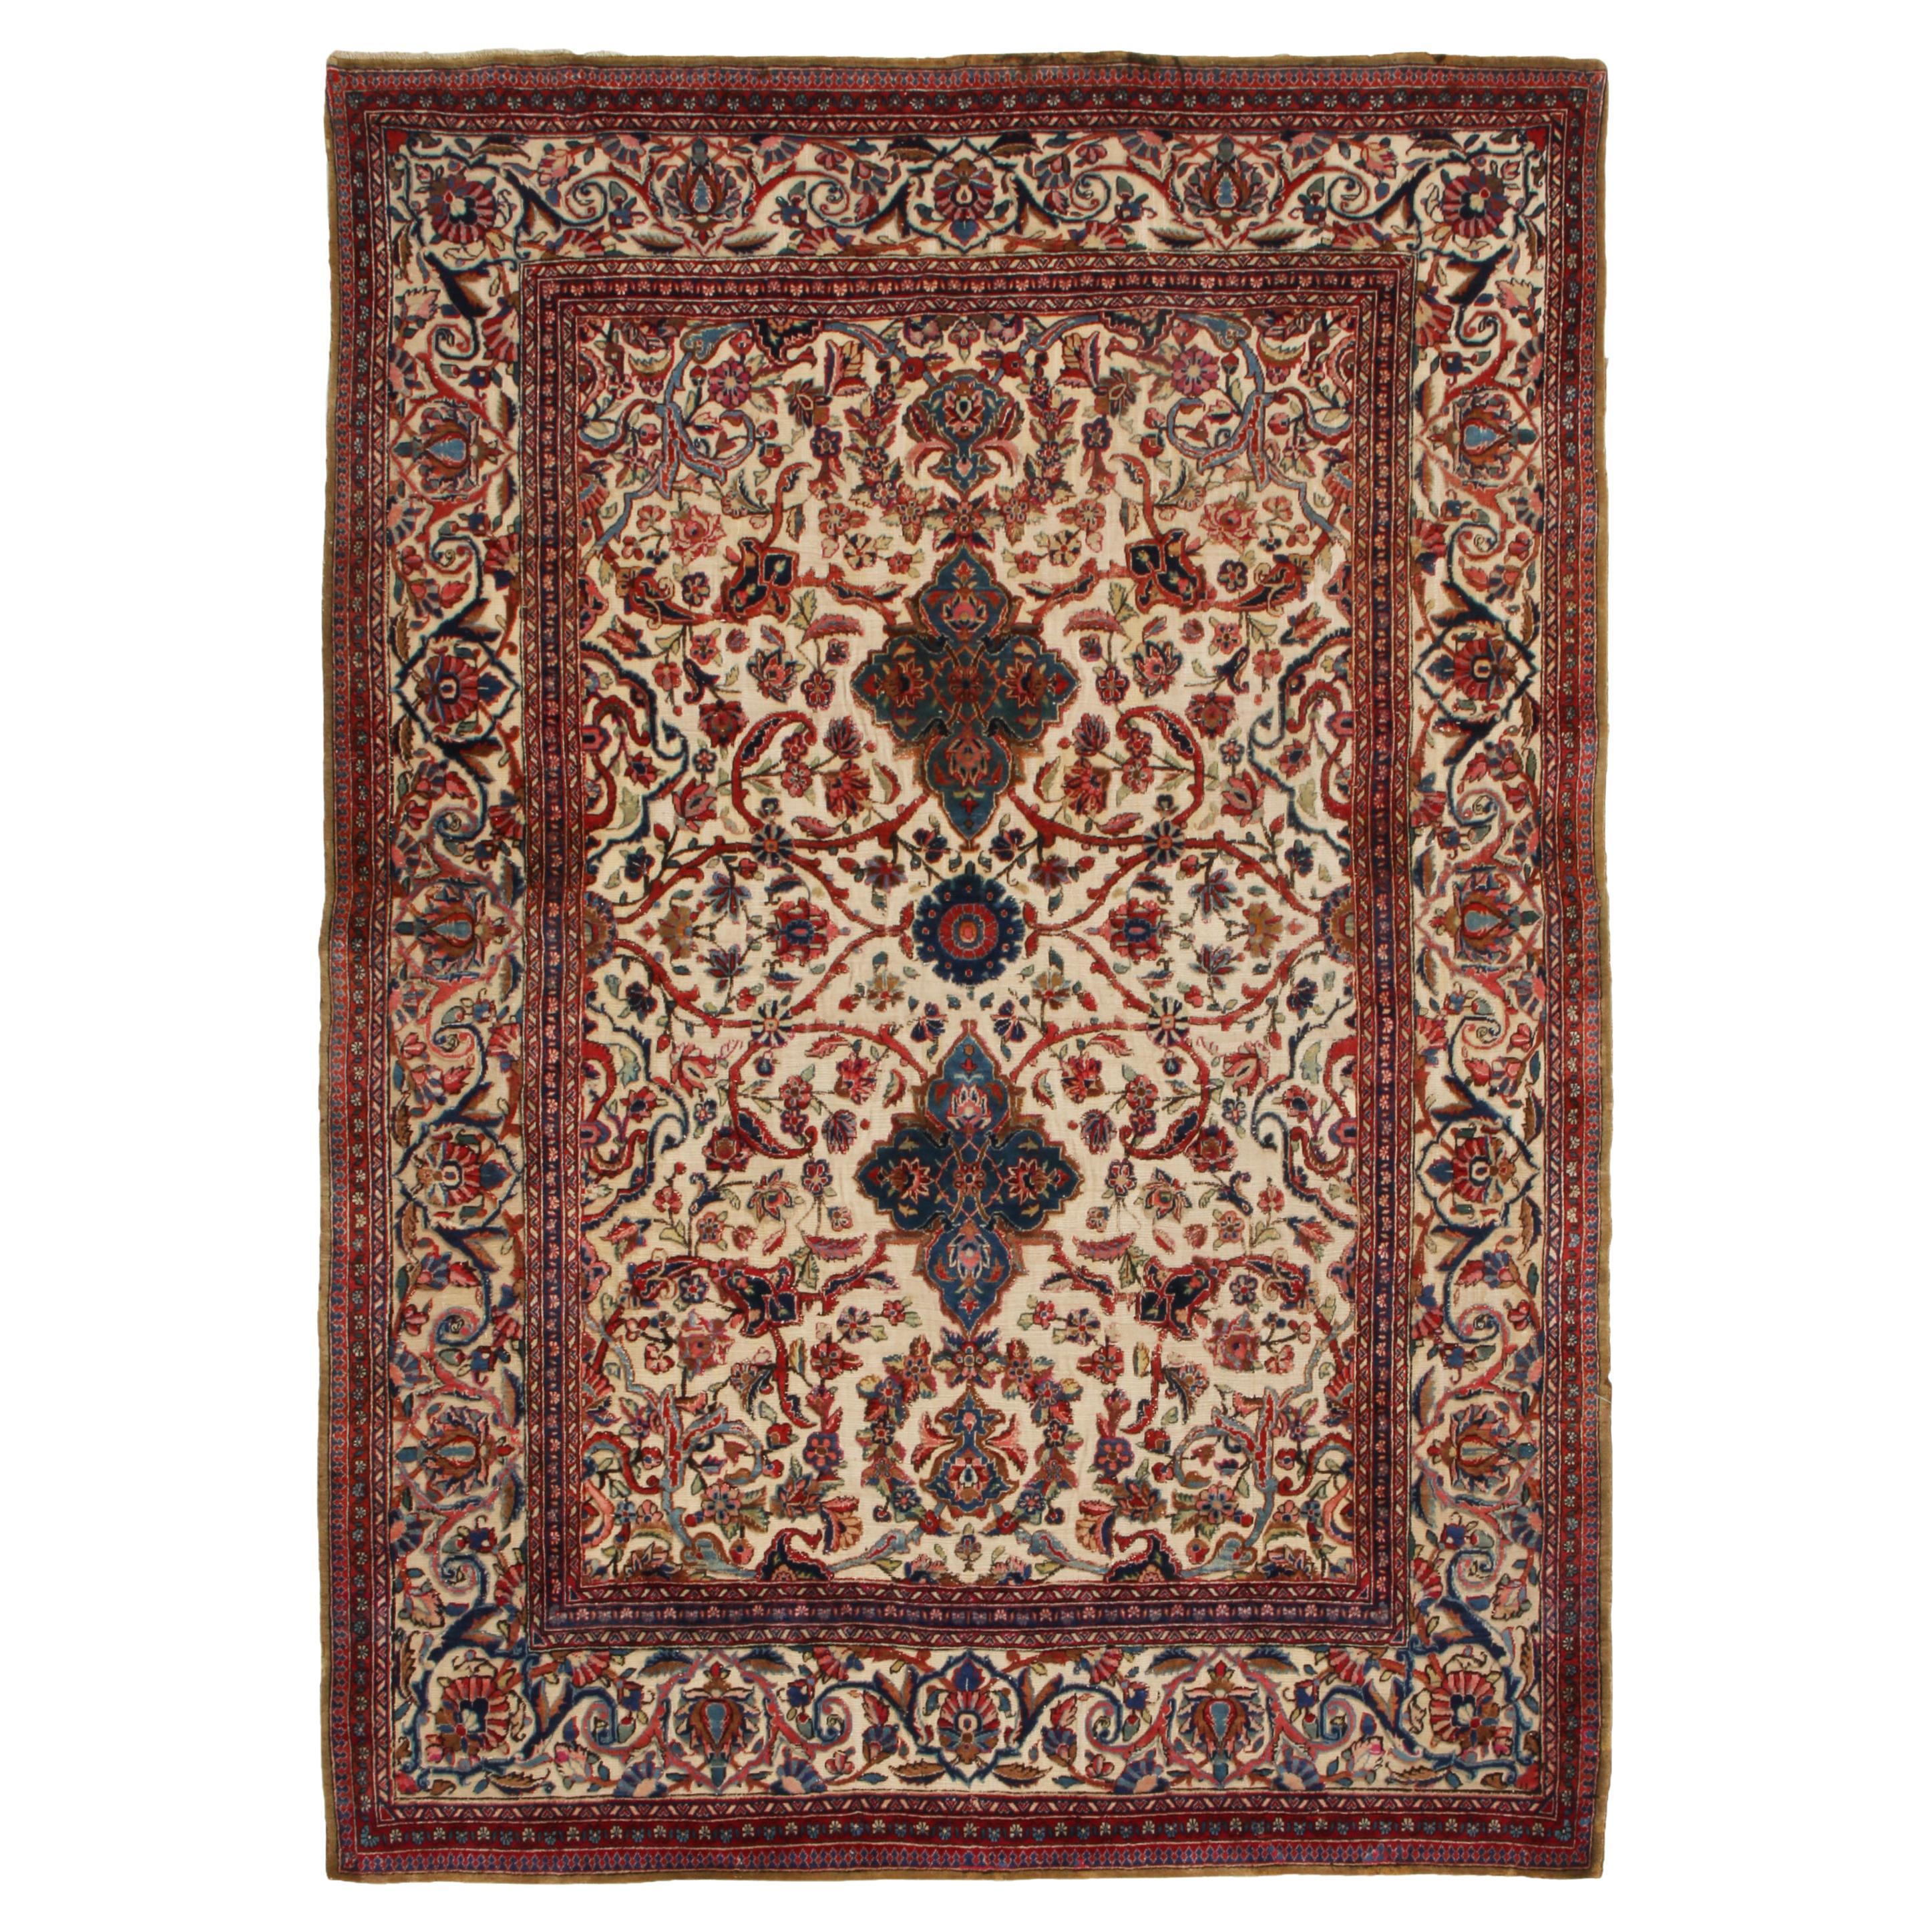 Antique Kashan Traditional Red Brown and Beig Silk Persian Rug by Rug & Kilim For Sale